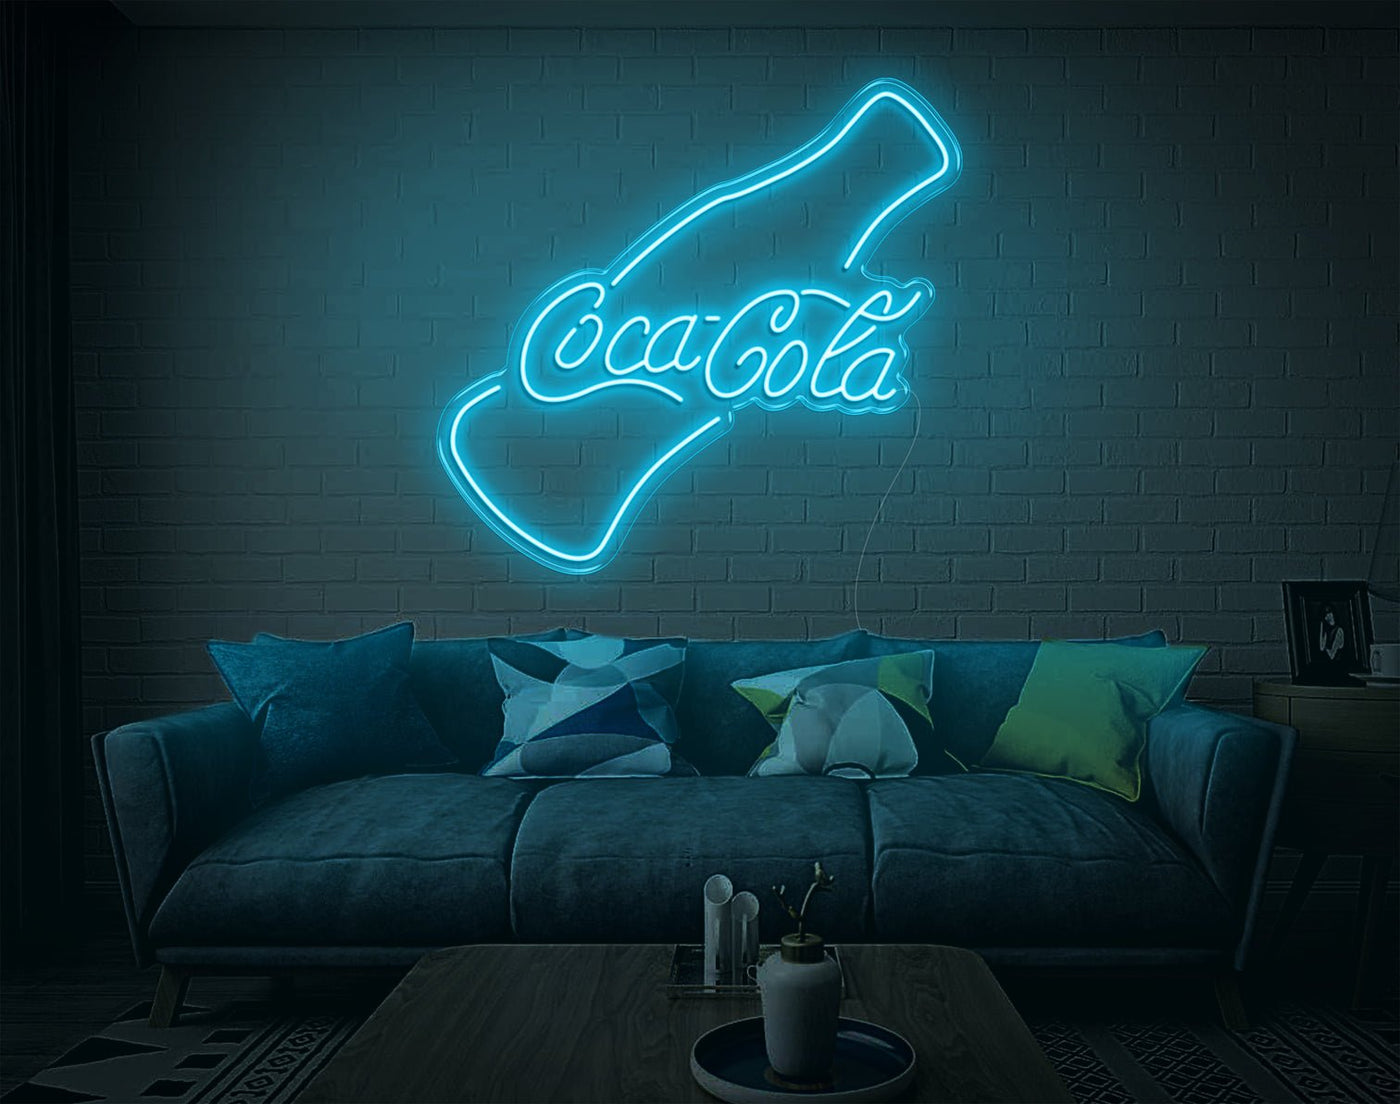 Coca-Cola V2 LED Neon Sign - 30inch x 32inchHot Pink